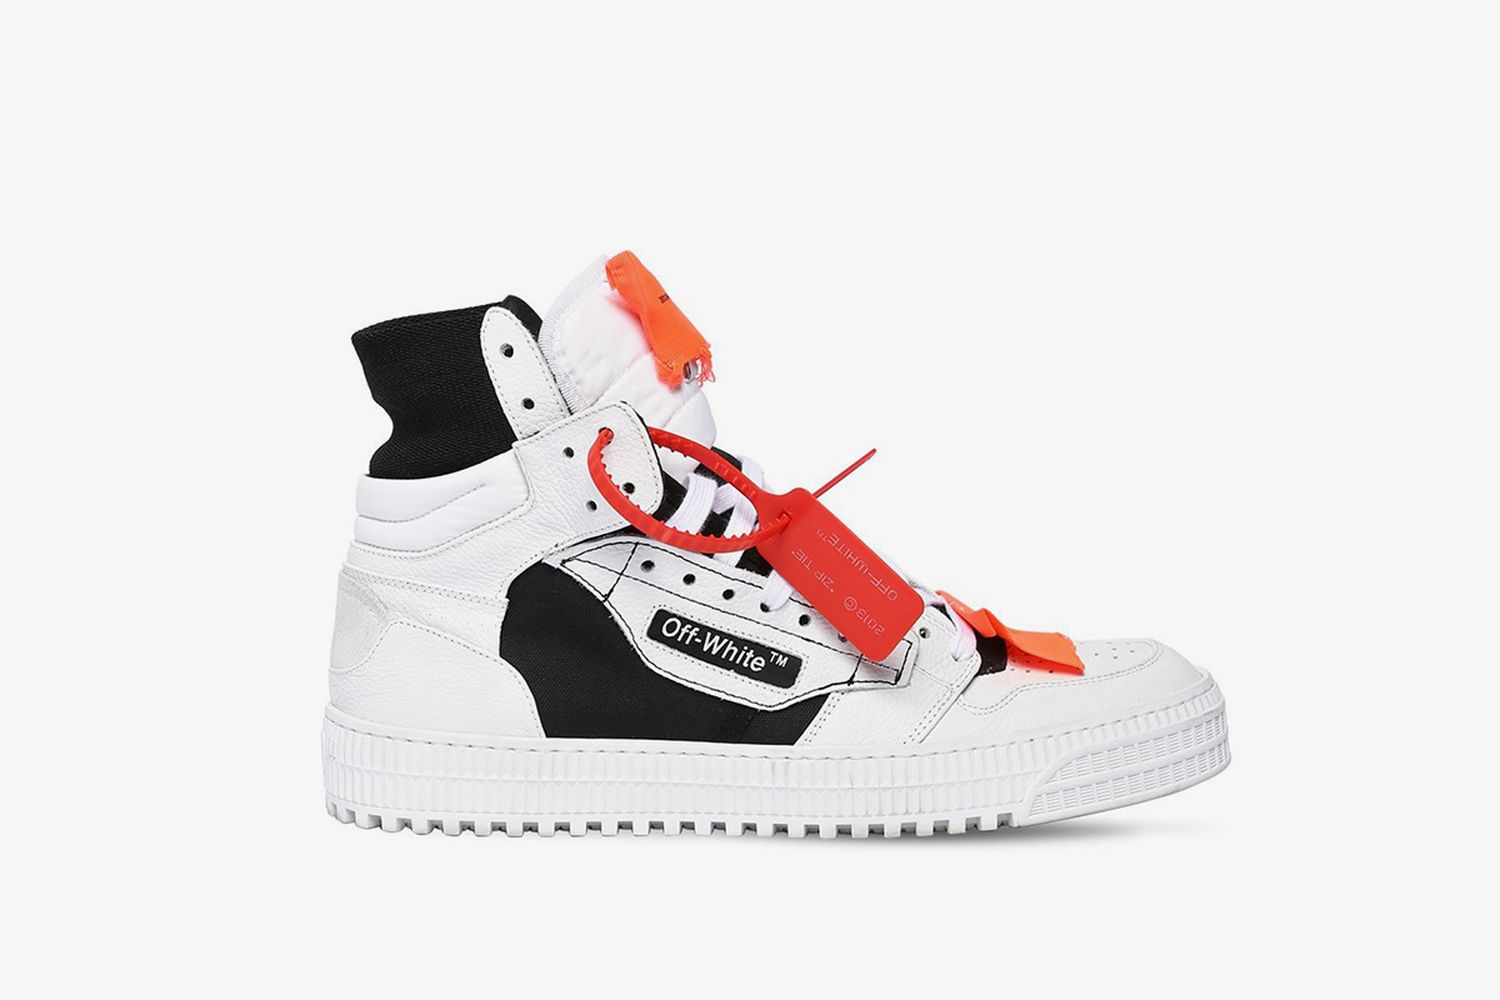 Land tone Literacy OFF-WHITE FW18 Sneaker Drop: Where to Buy Online